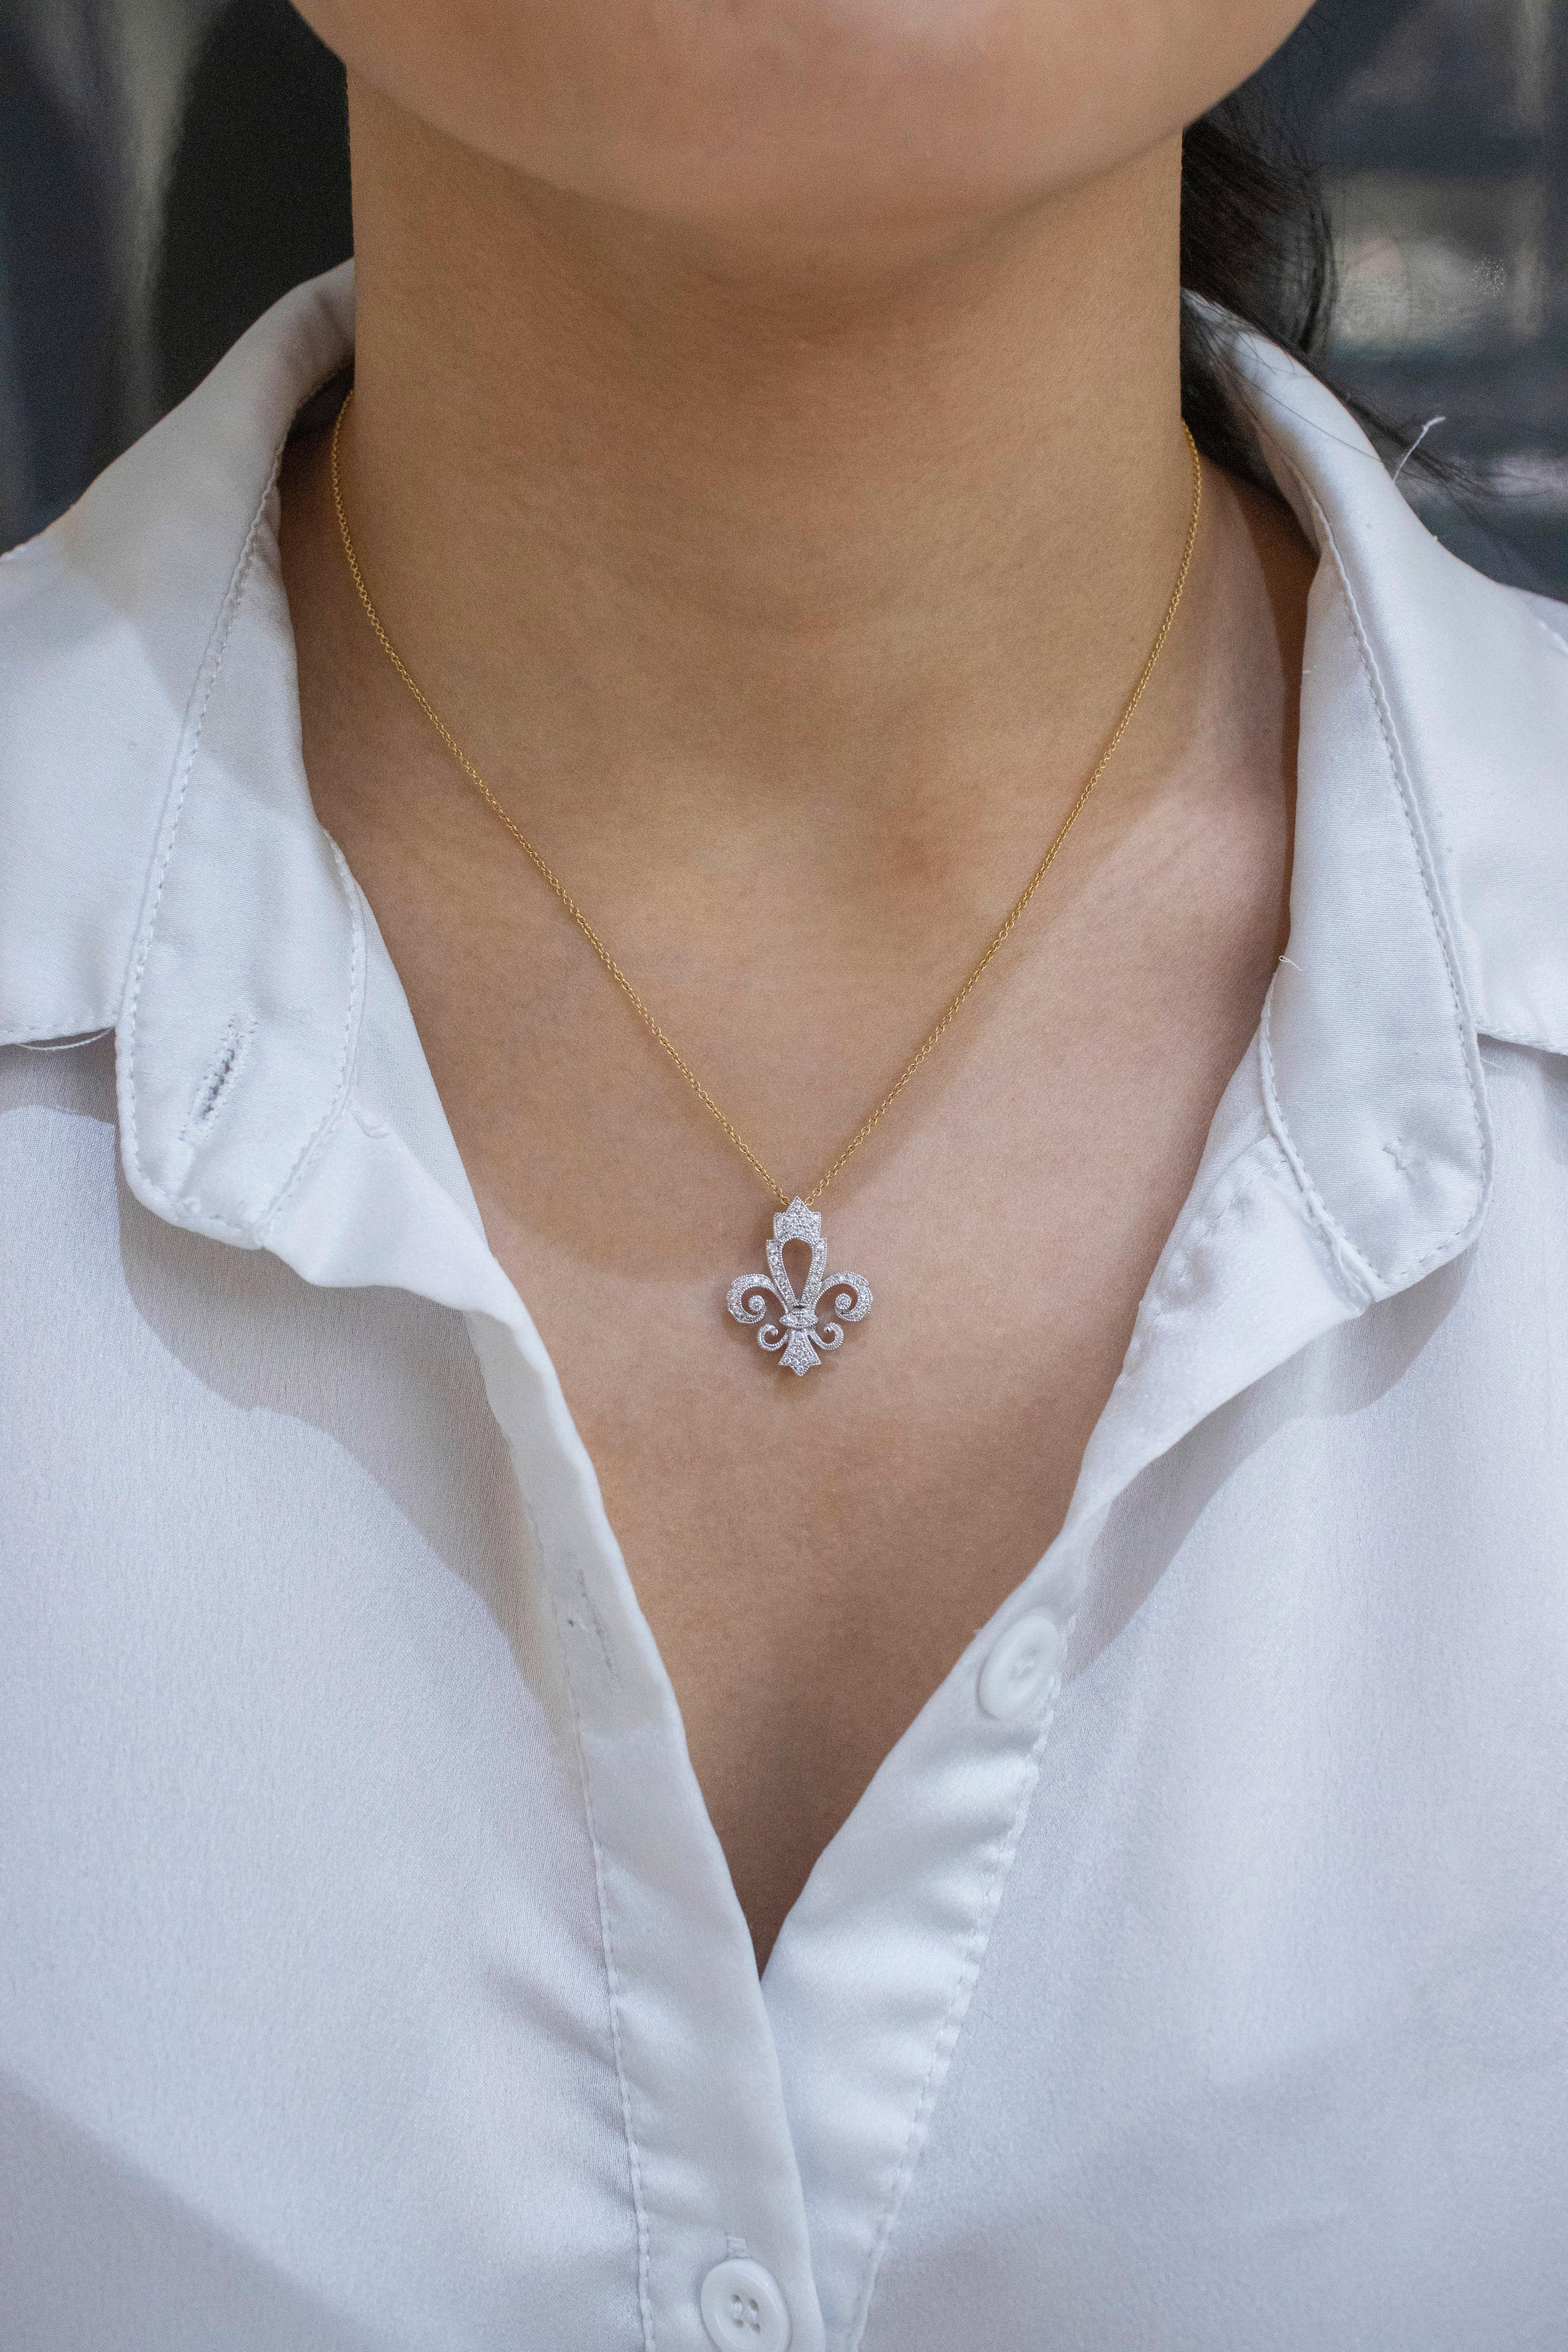 A fashionable pendant showcasing round brilliant diamonds, set in a fleur-de-lis design made in 18 karat white gold. Diamonds weigh 0.23 carats total. Suspended on a yellow gold chain.

